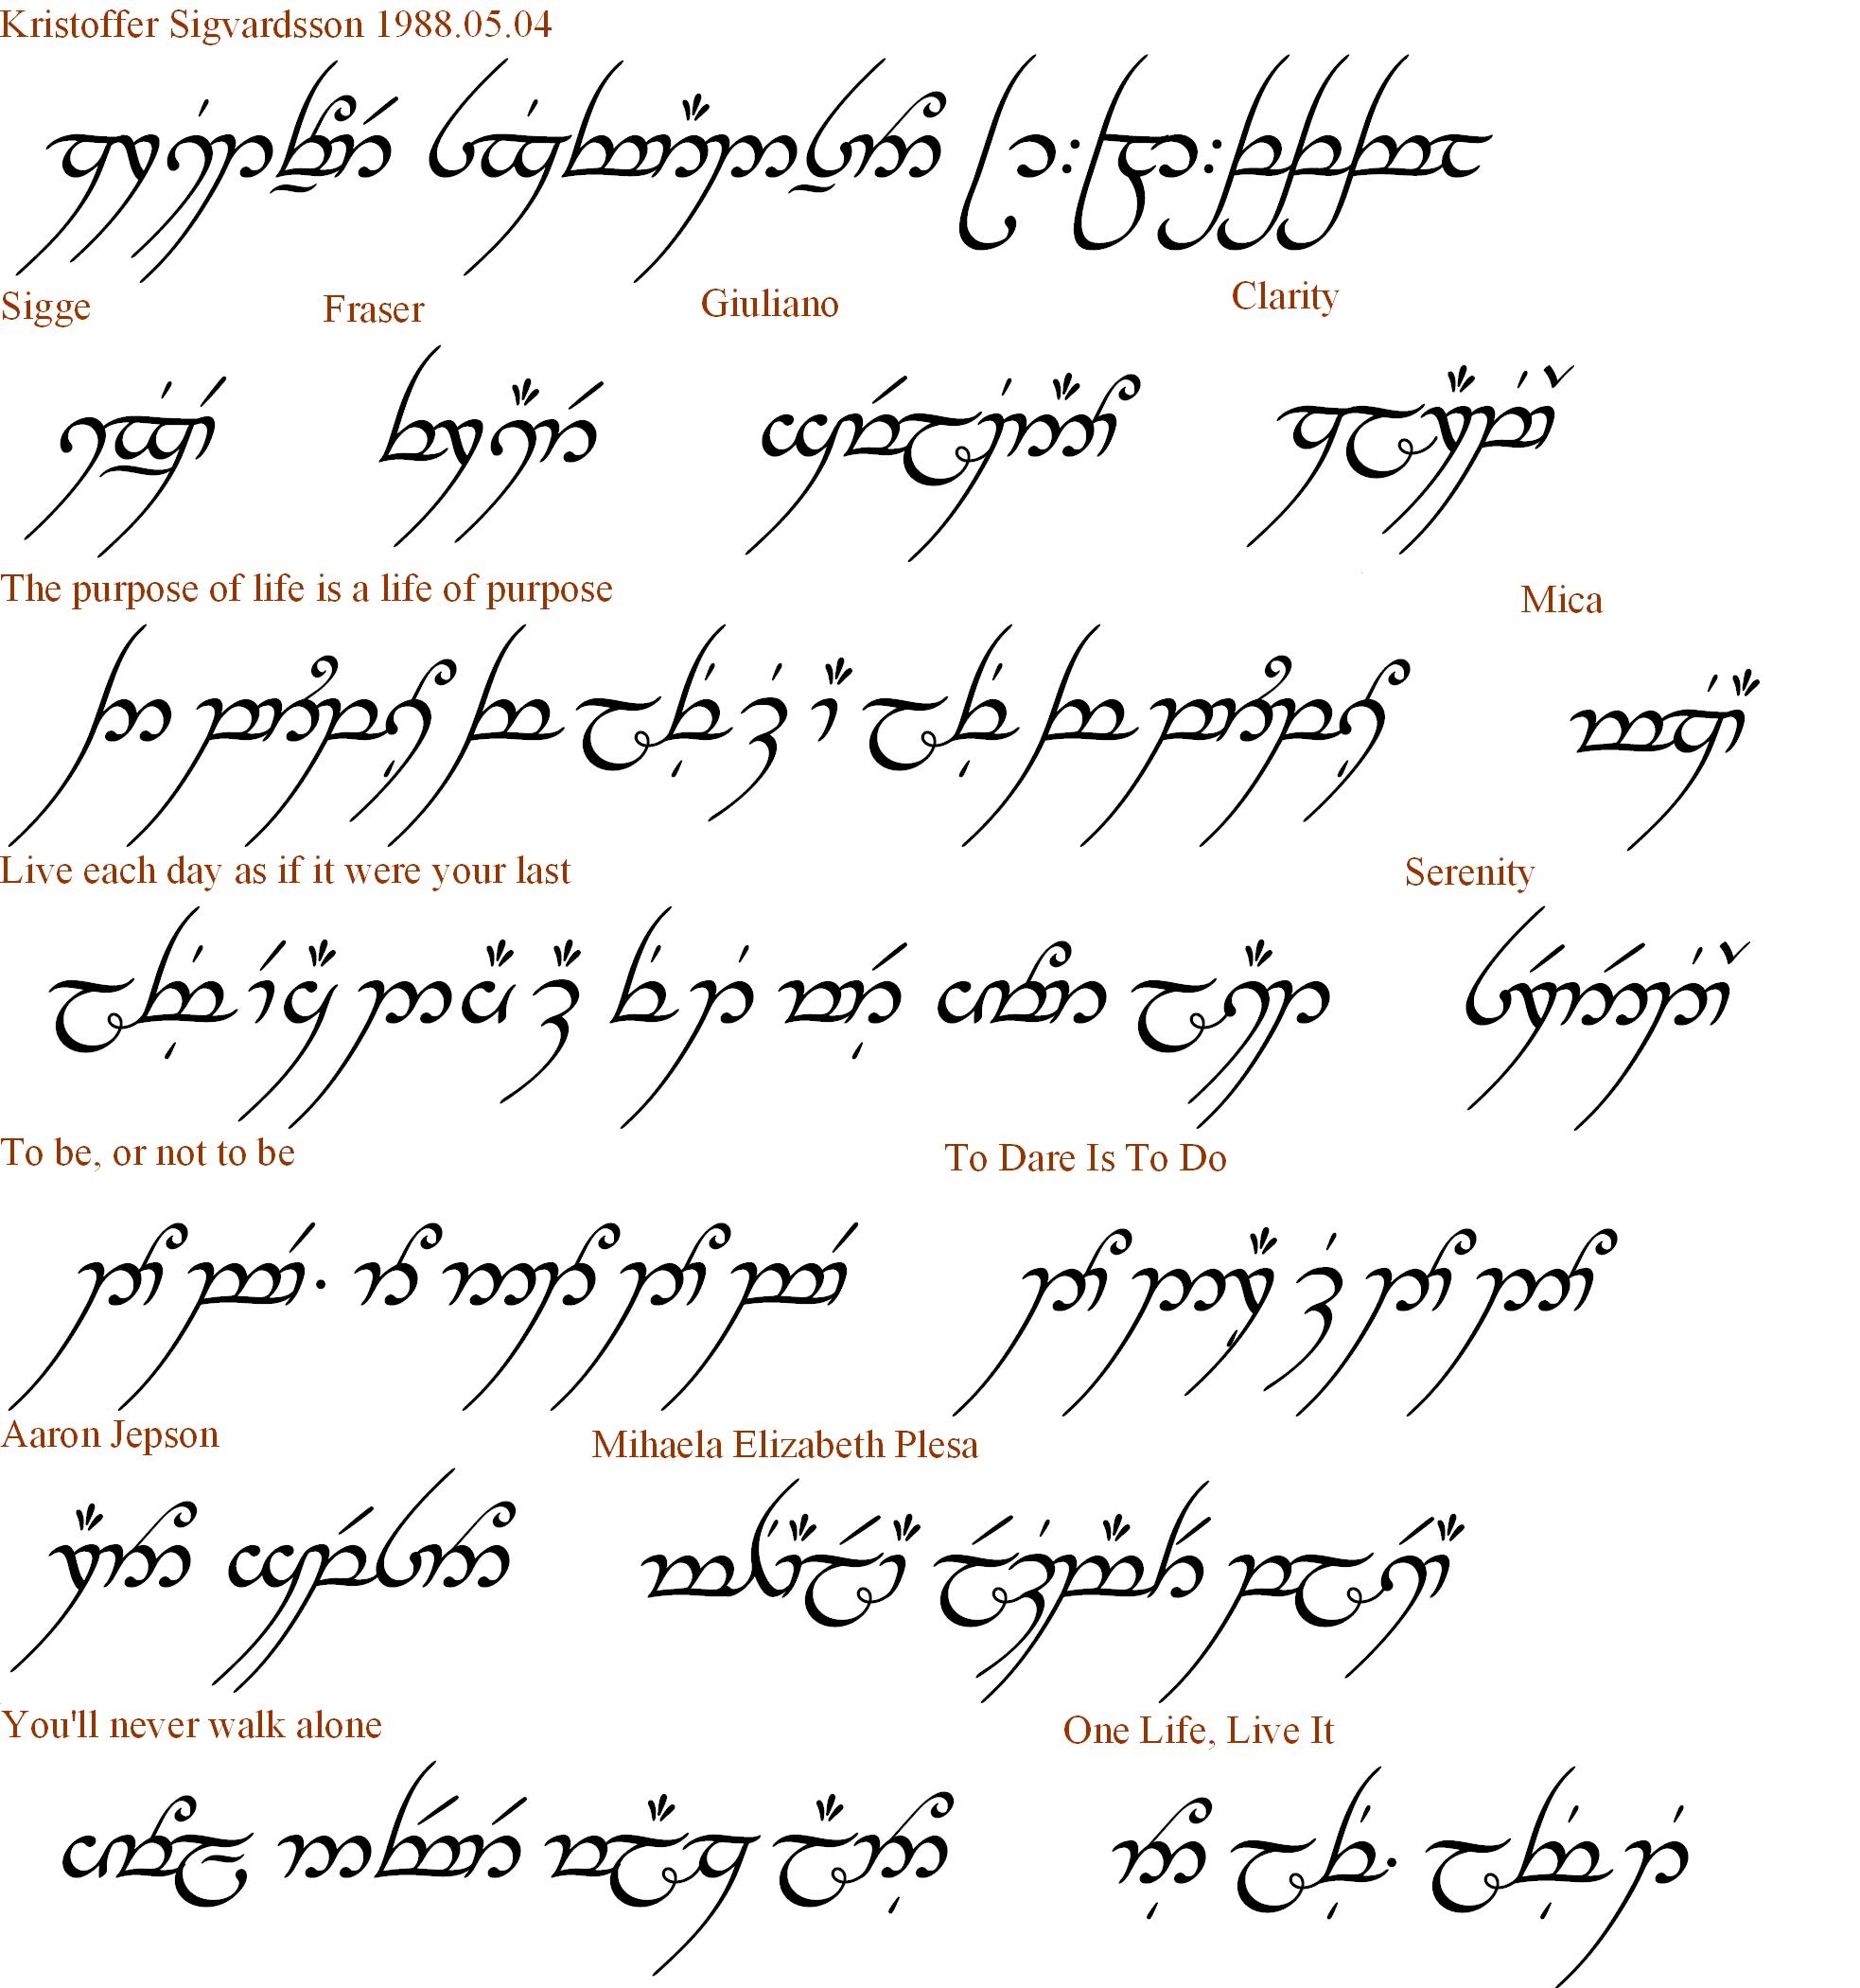 Lord Of The Rings Quotes In Elvish Wallpaper Image Photo